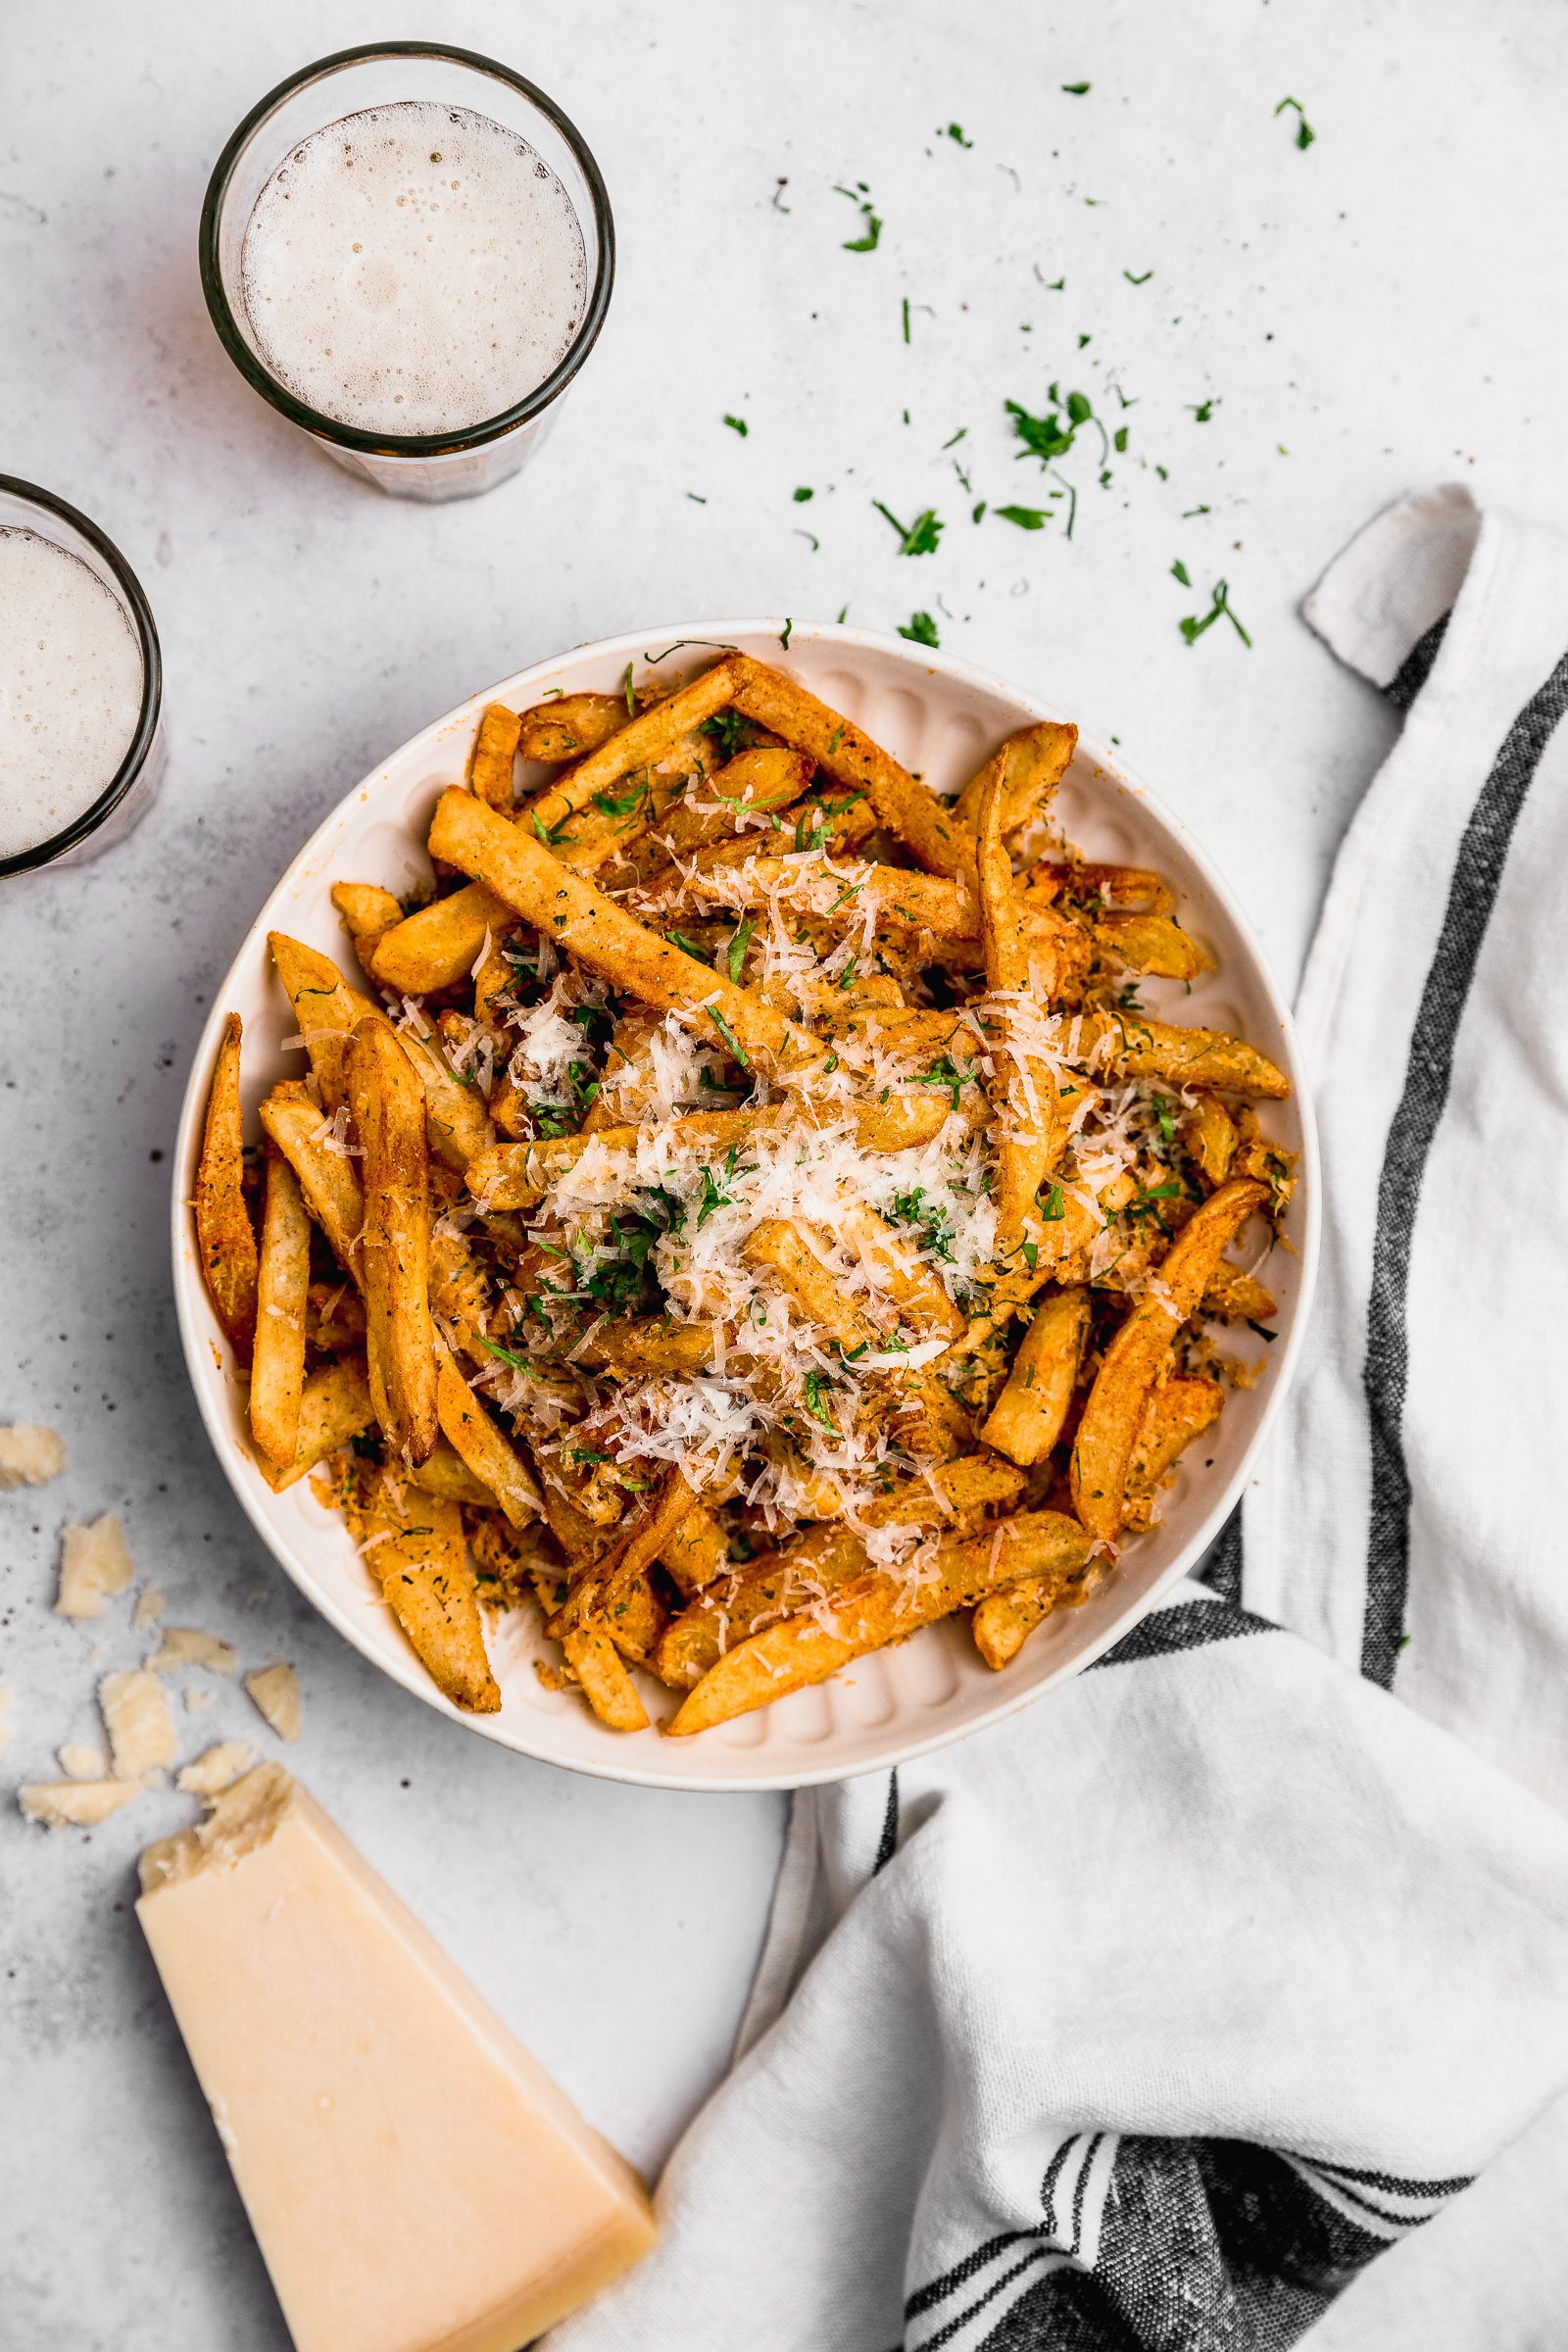 Large bowl of garlic parmesan fries, serve with chopped fresh parsley. You can see they're golden and crispy.